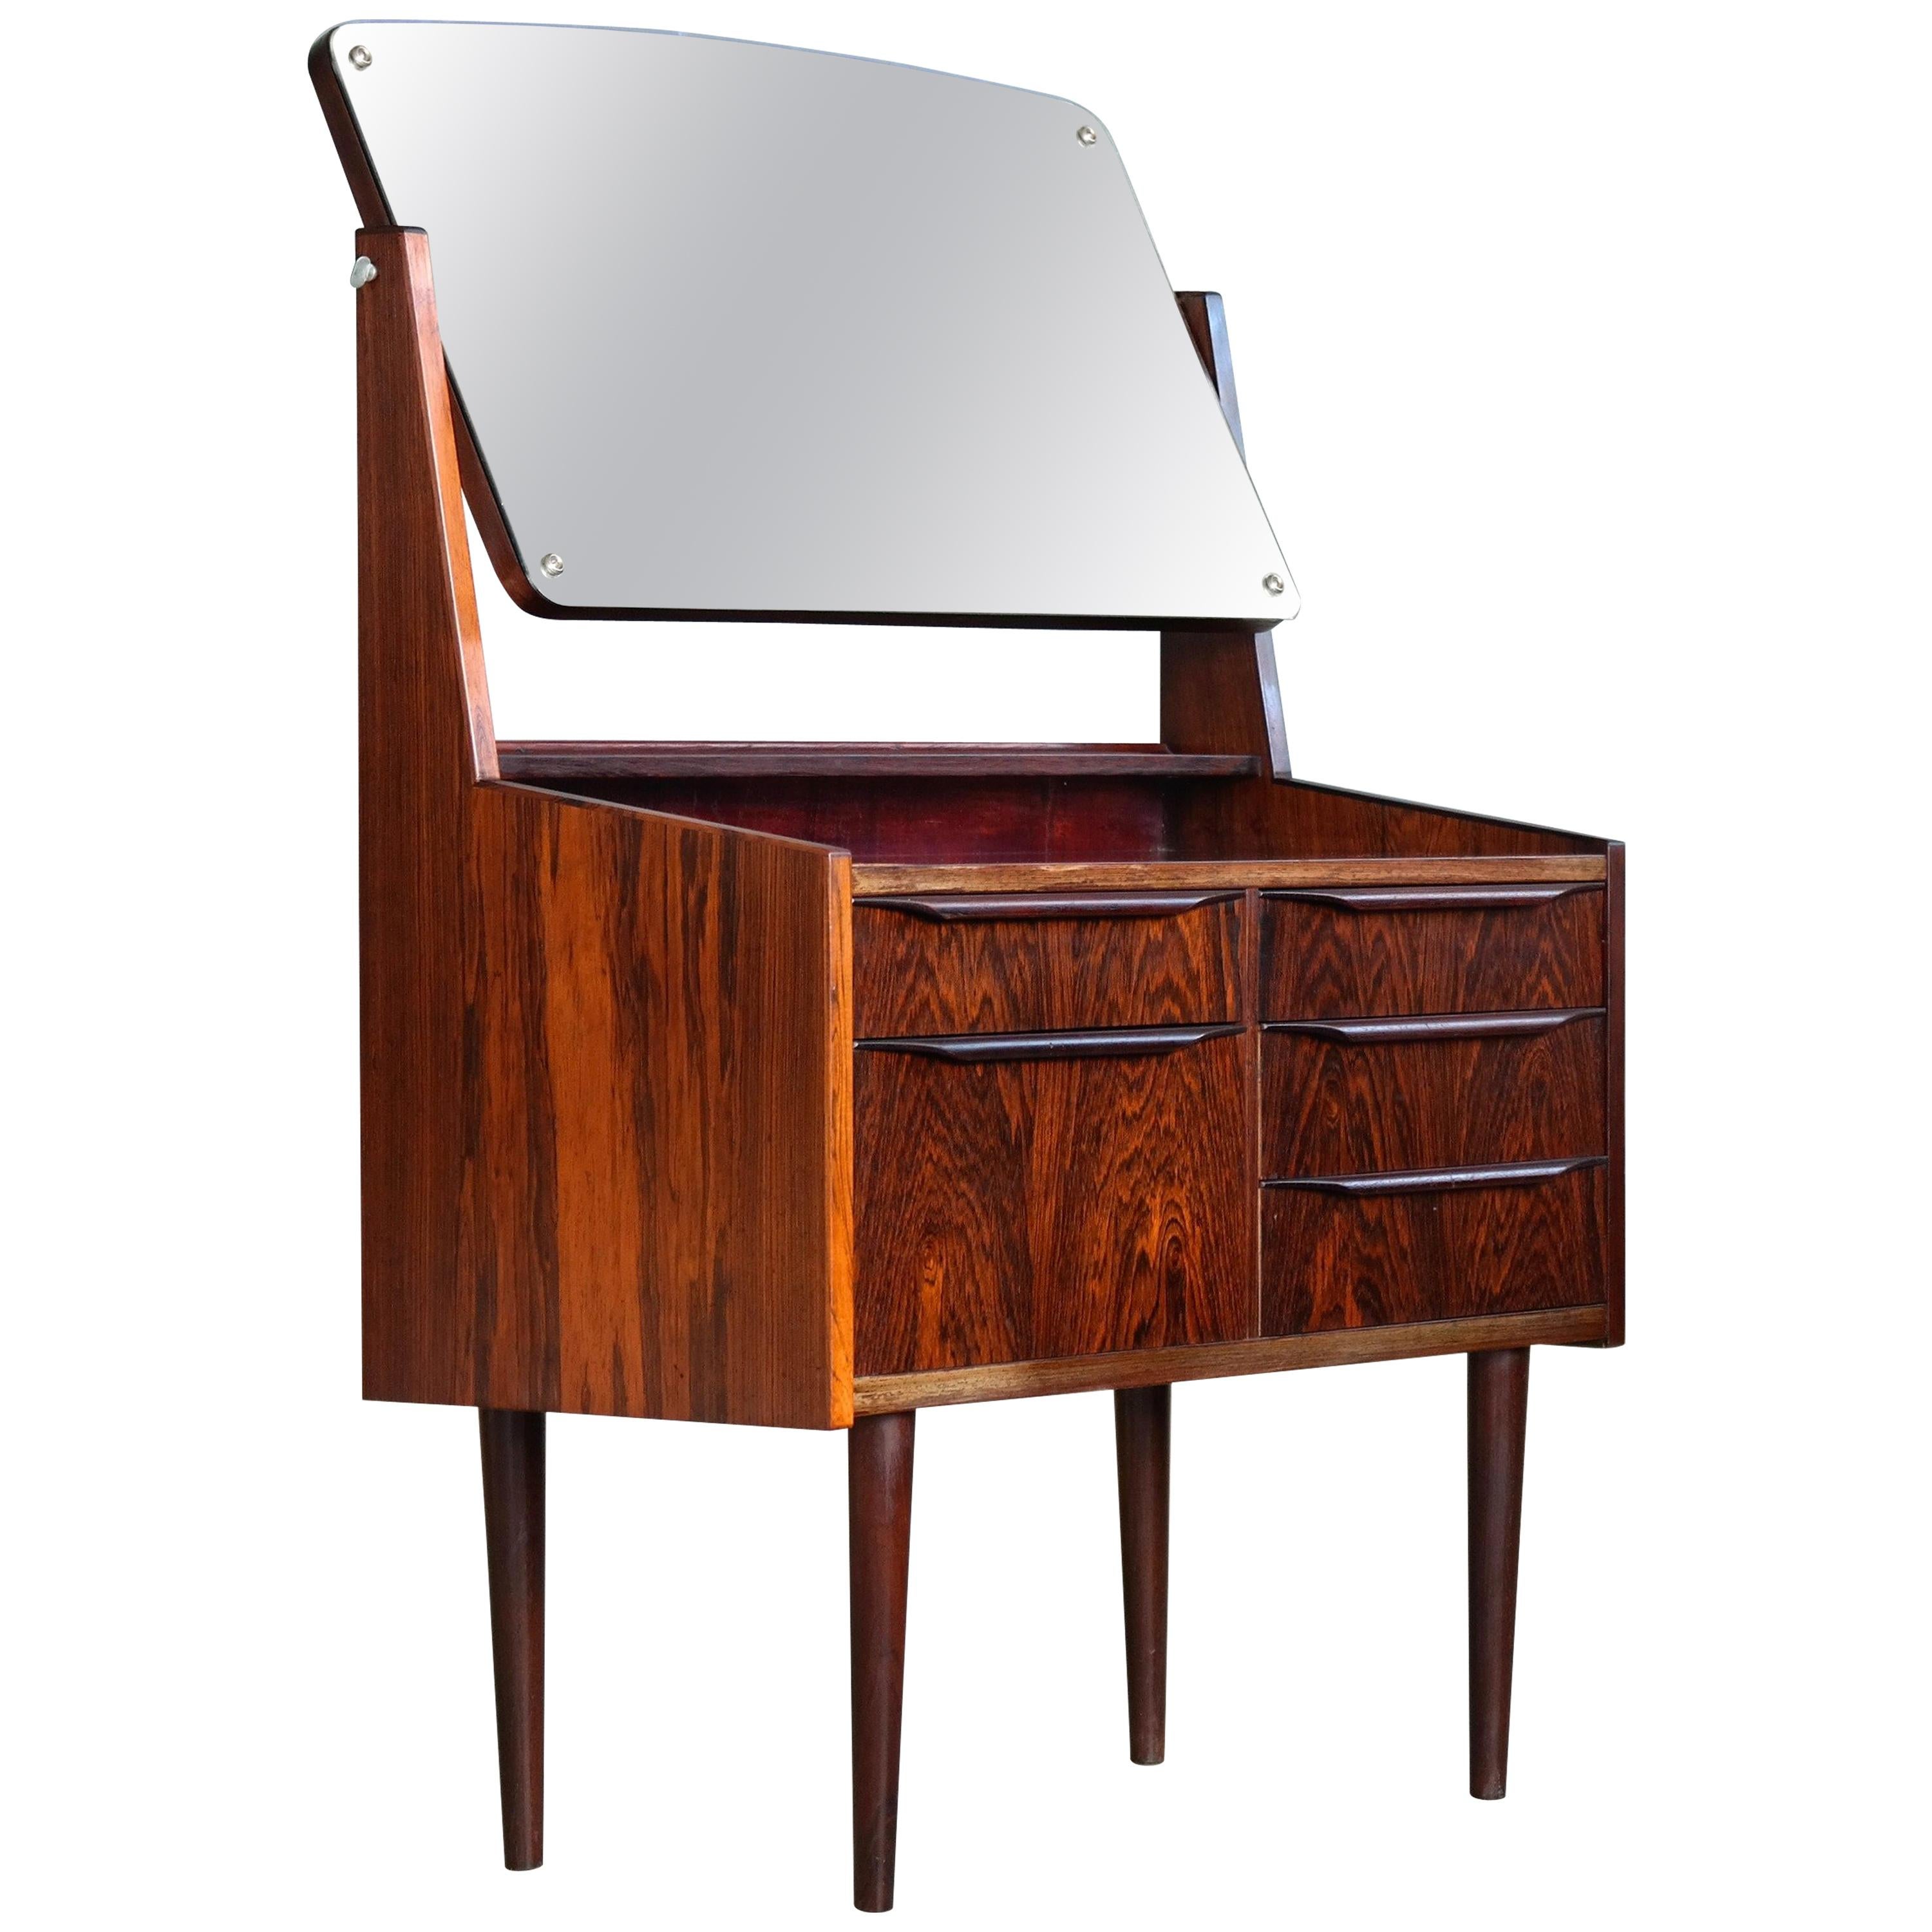 Danish Midcentury Vanity or Dressing Table in Rosewood with Mirror and Drawers